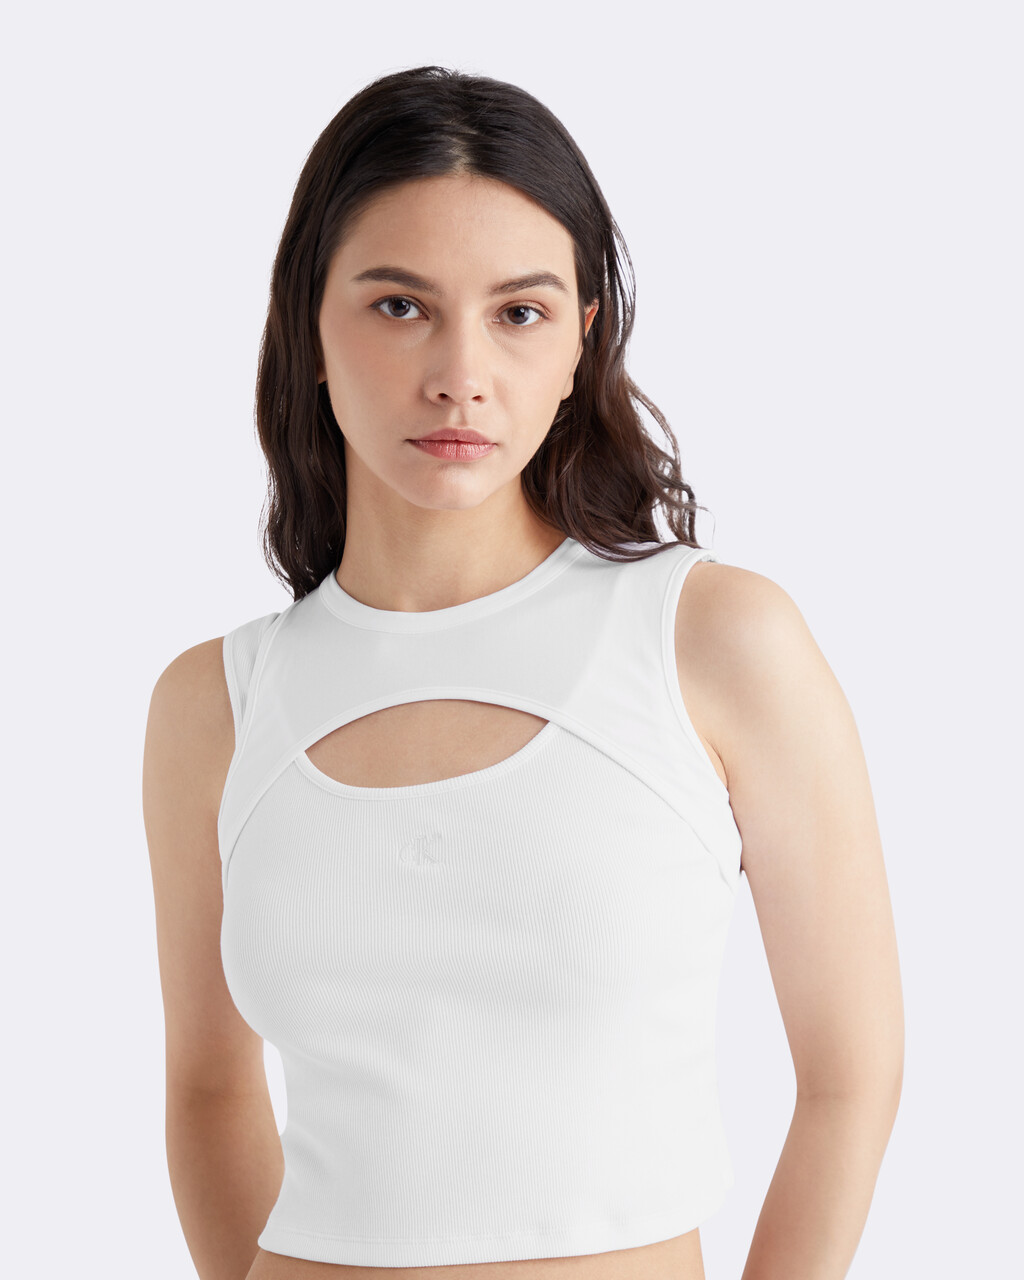 Layered Cut-out Tank Top, BRIGHT WHITE, hi-res